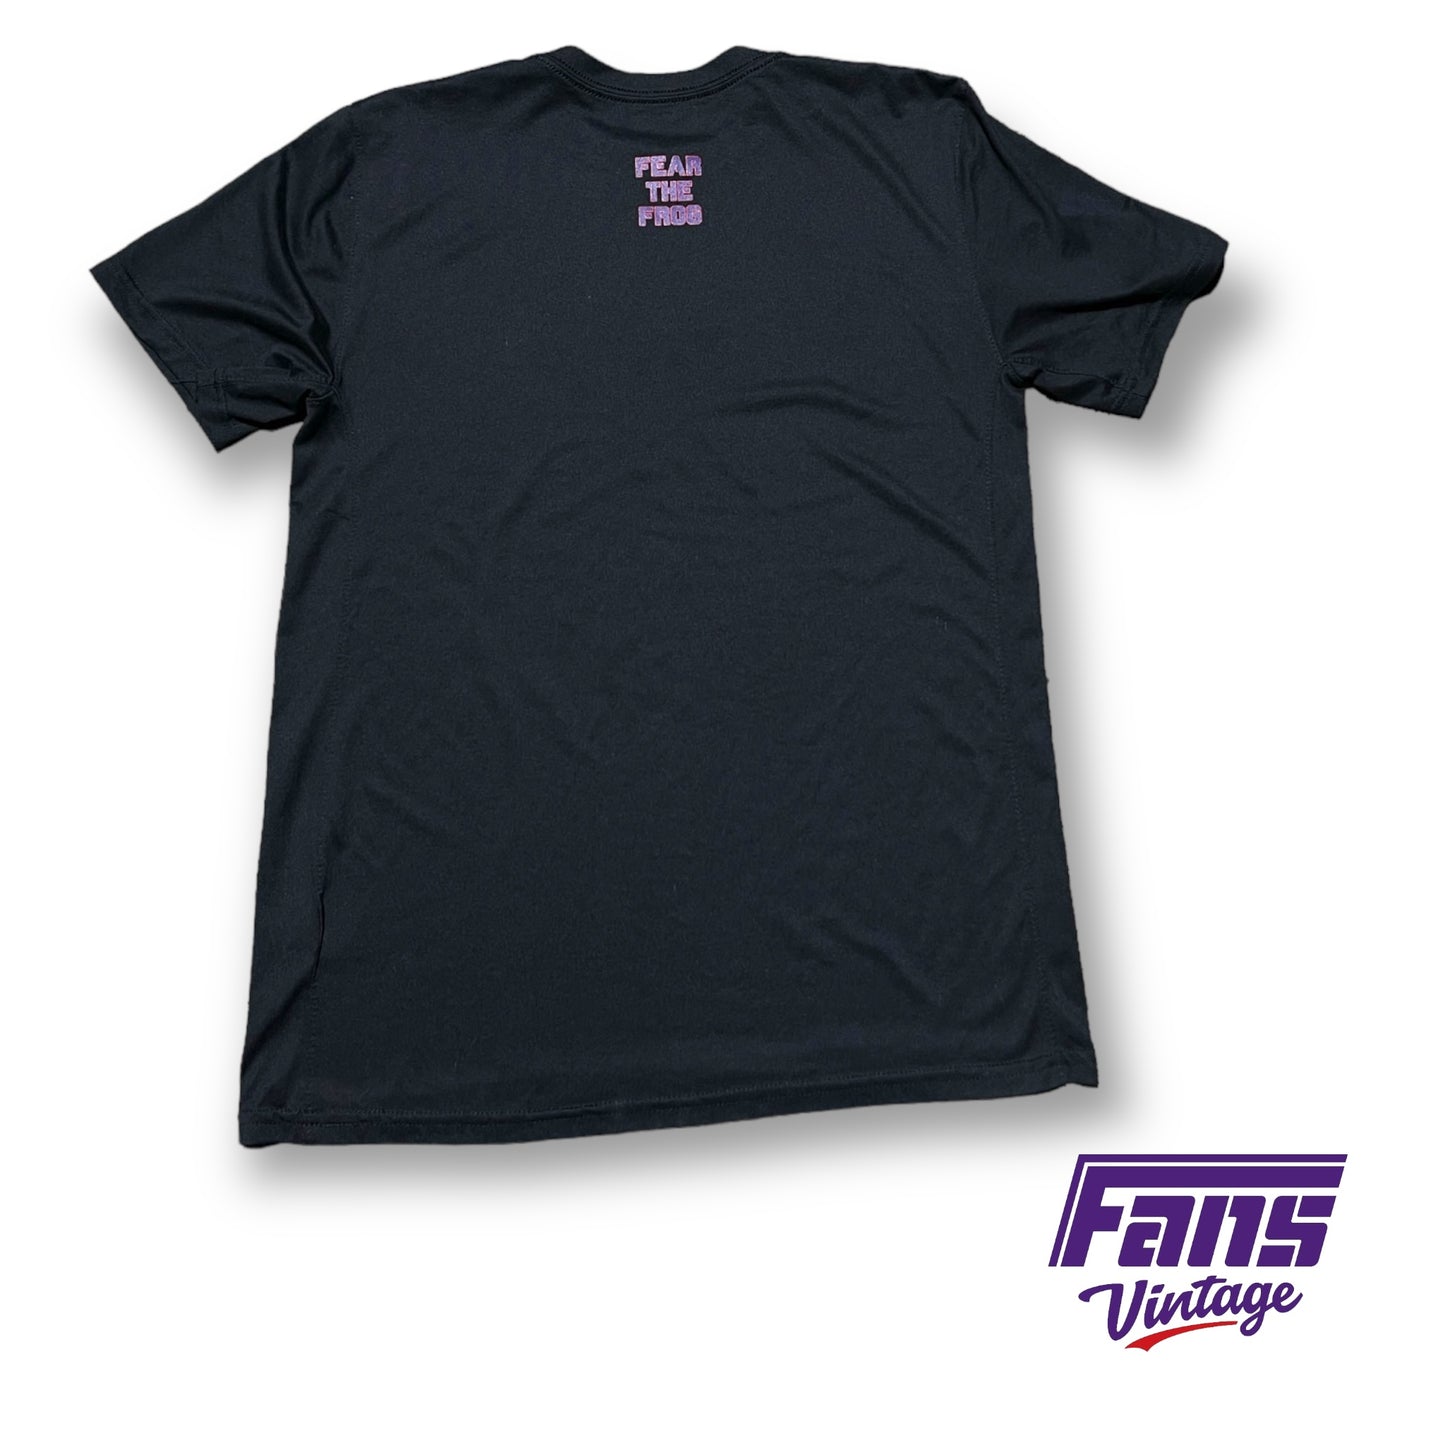 Limited Edition TCU Baseball Team Issued “Spit Blood” Colorway Nike Drifit Tee with “Fear the Frog” Logo